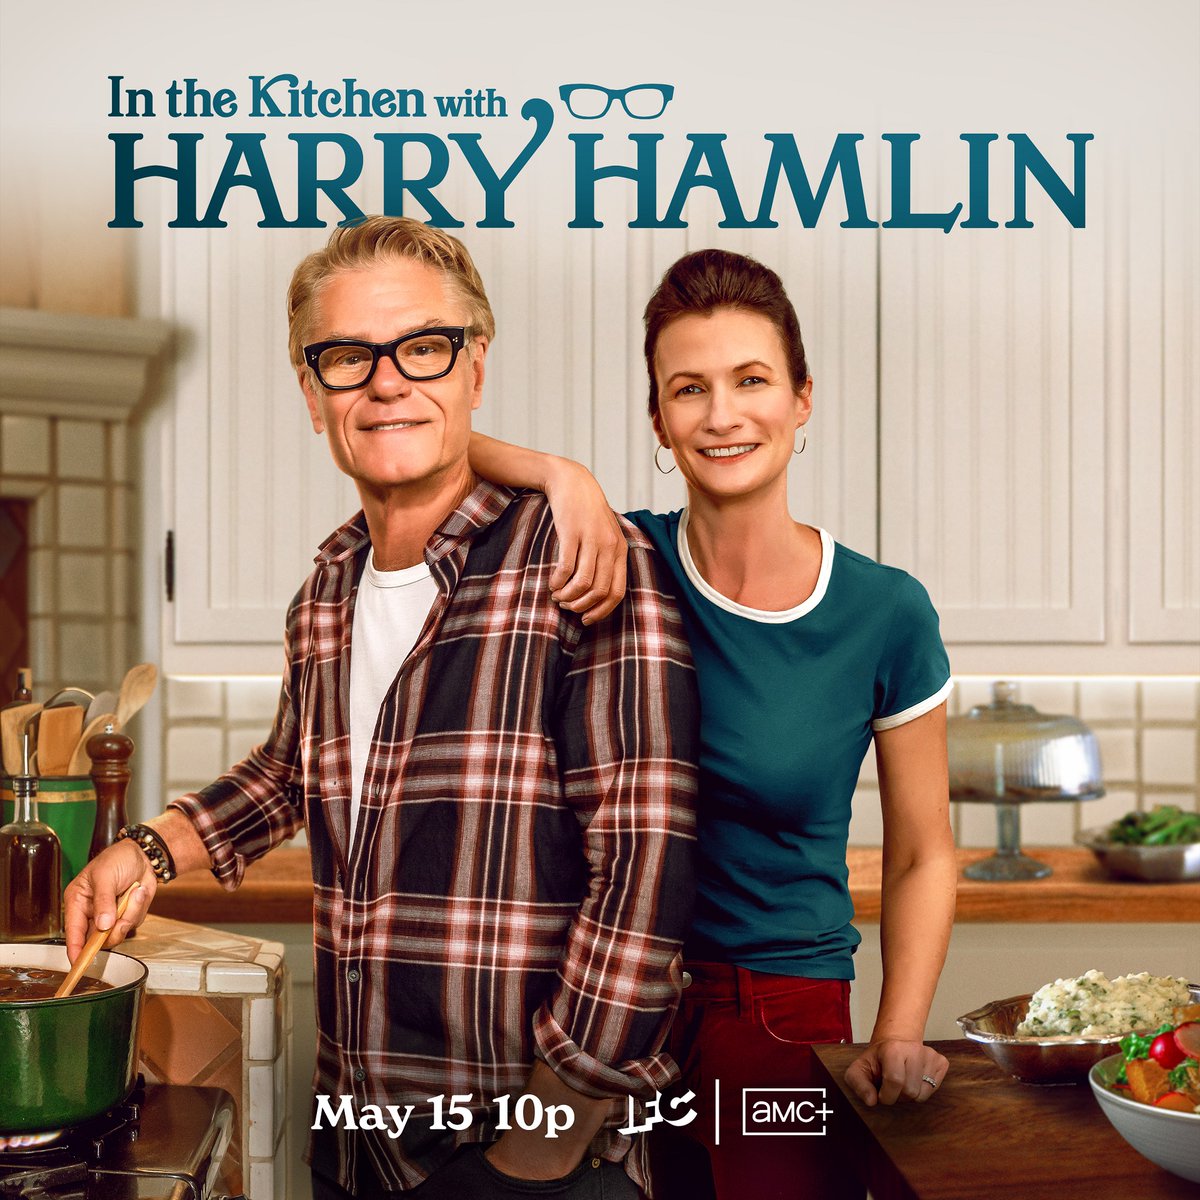 Join Harry Hamlin and his niece, classically trained chef Renee Guilbault, for a series of dinner parties you'll never forget! #InTheKitchen with Harry Hamlin premieres next Wednesday at 10pm on @IFC and AMC+.